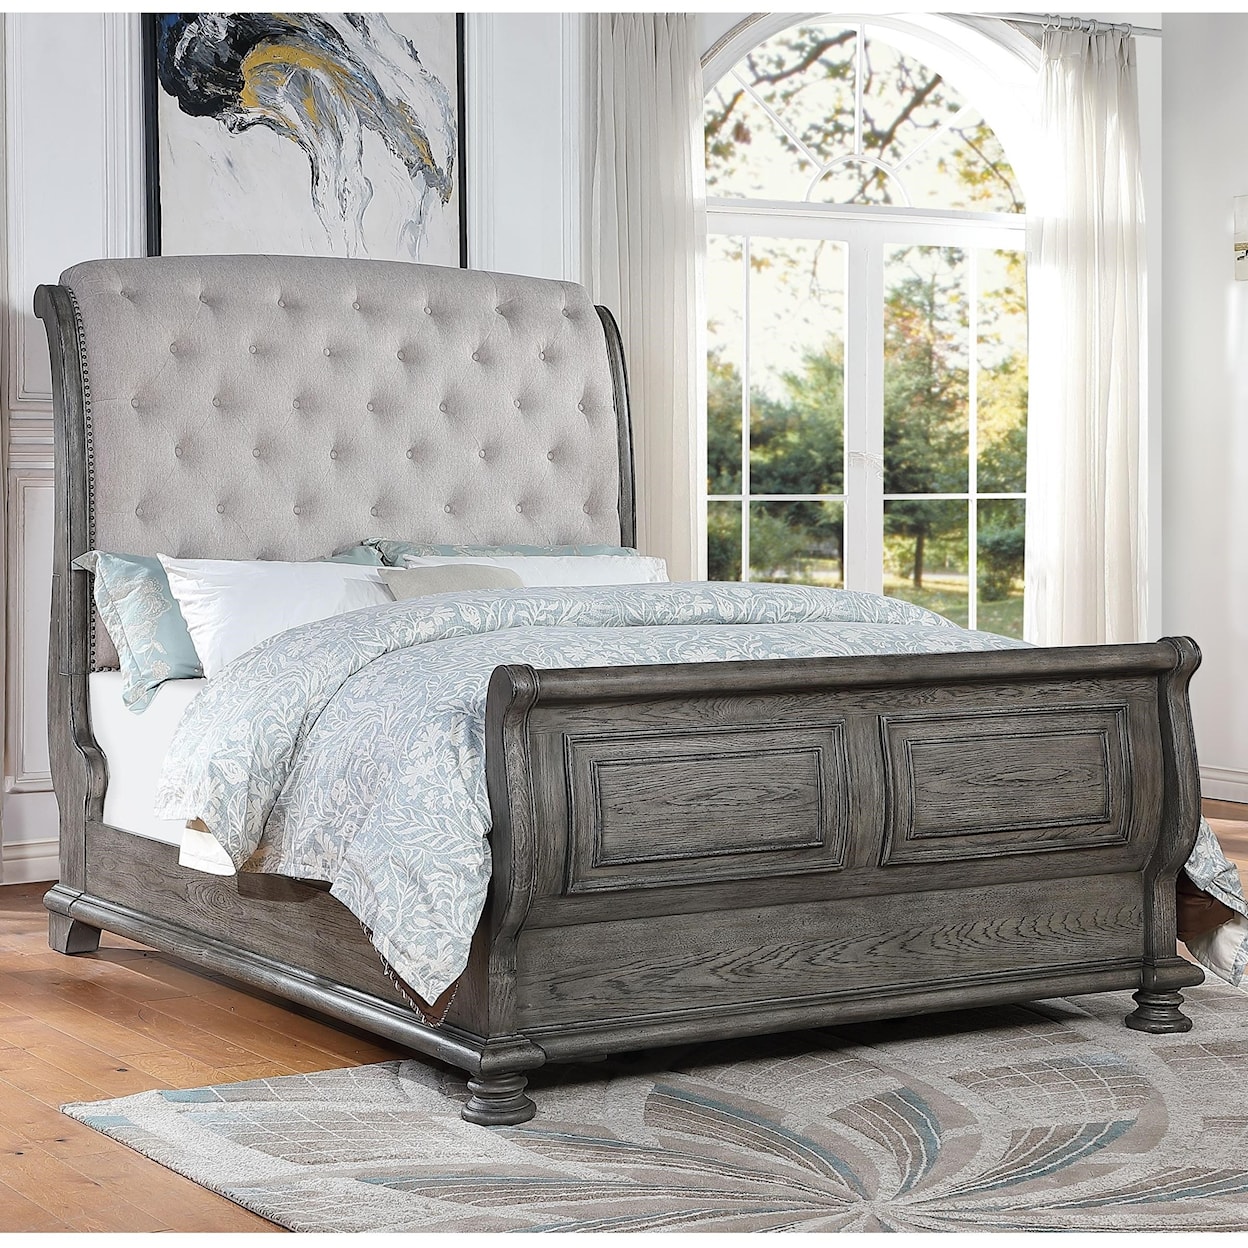 Avalon Furniture Lakeway King Upholstered Sleigh Bed